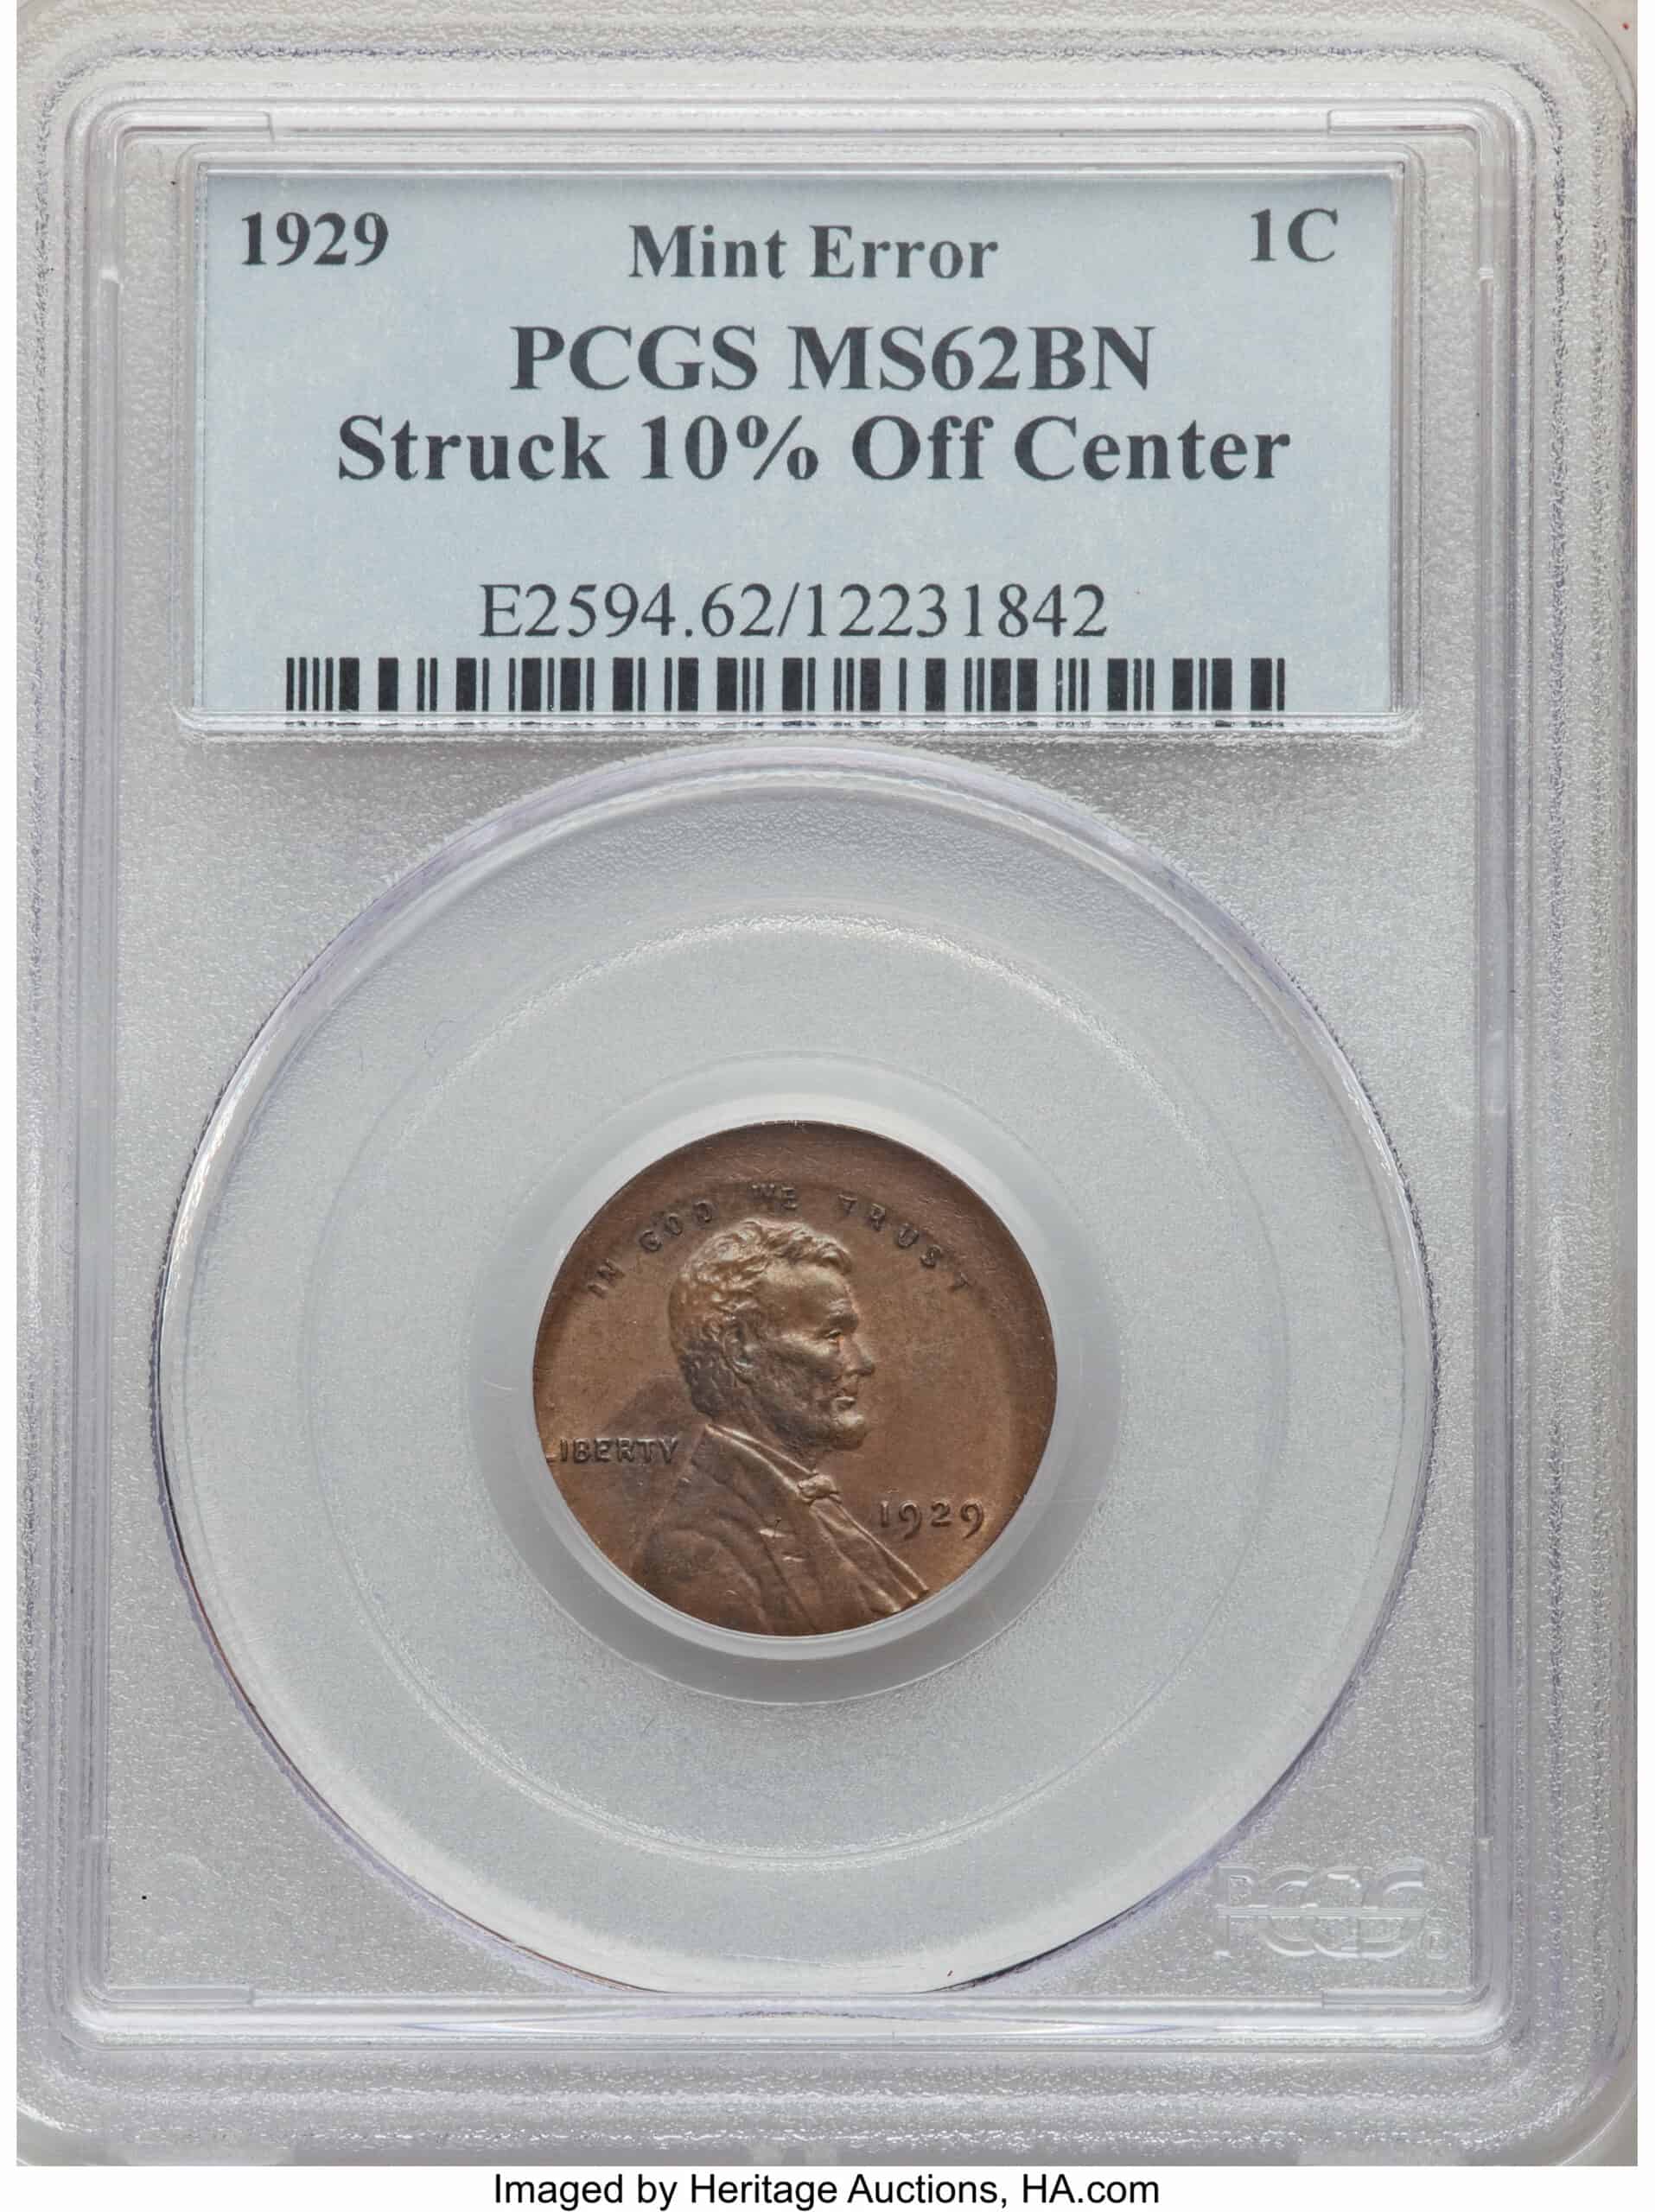 1929 Wheat Penny Off-Center